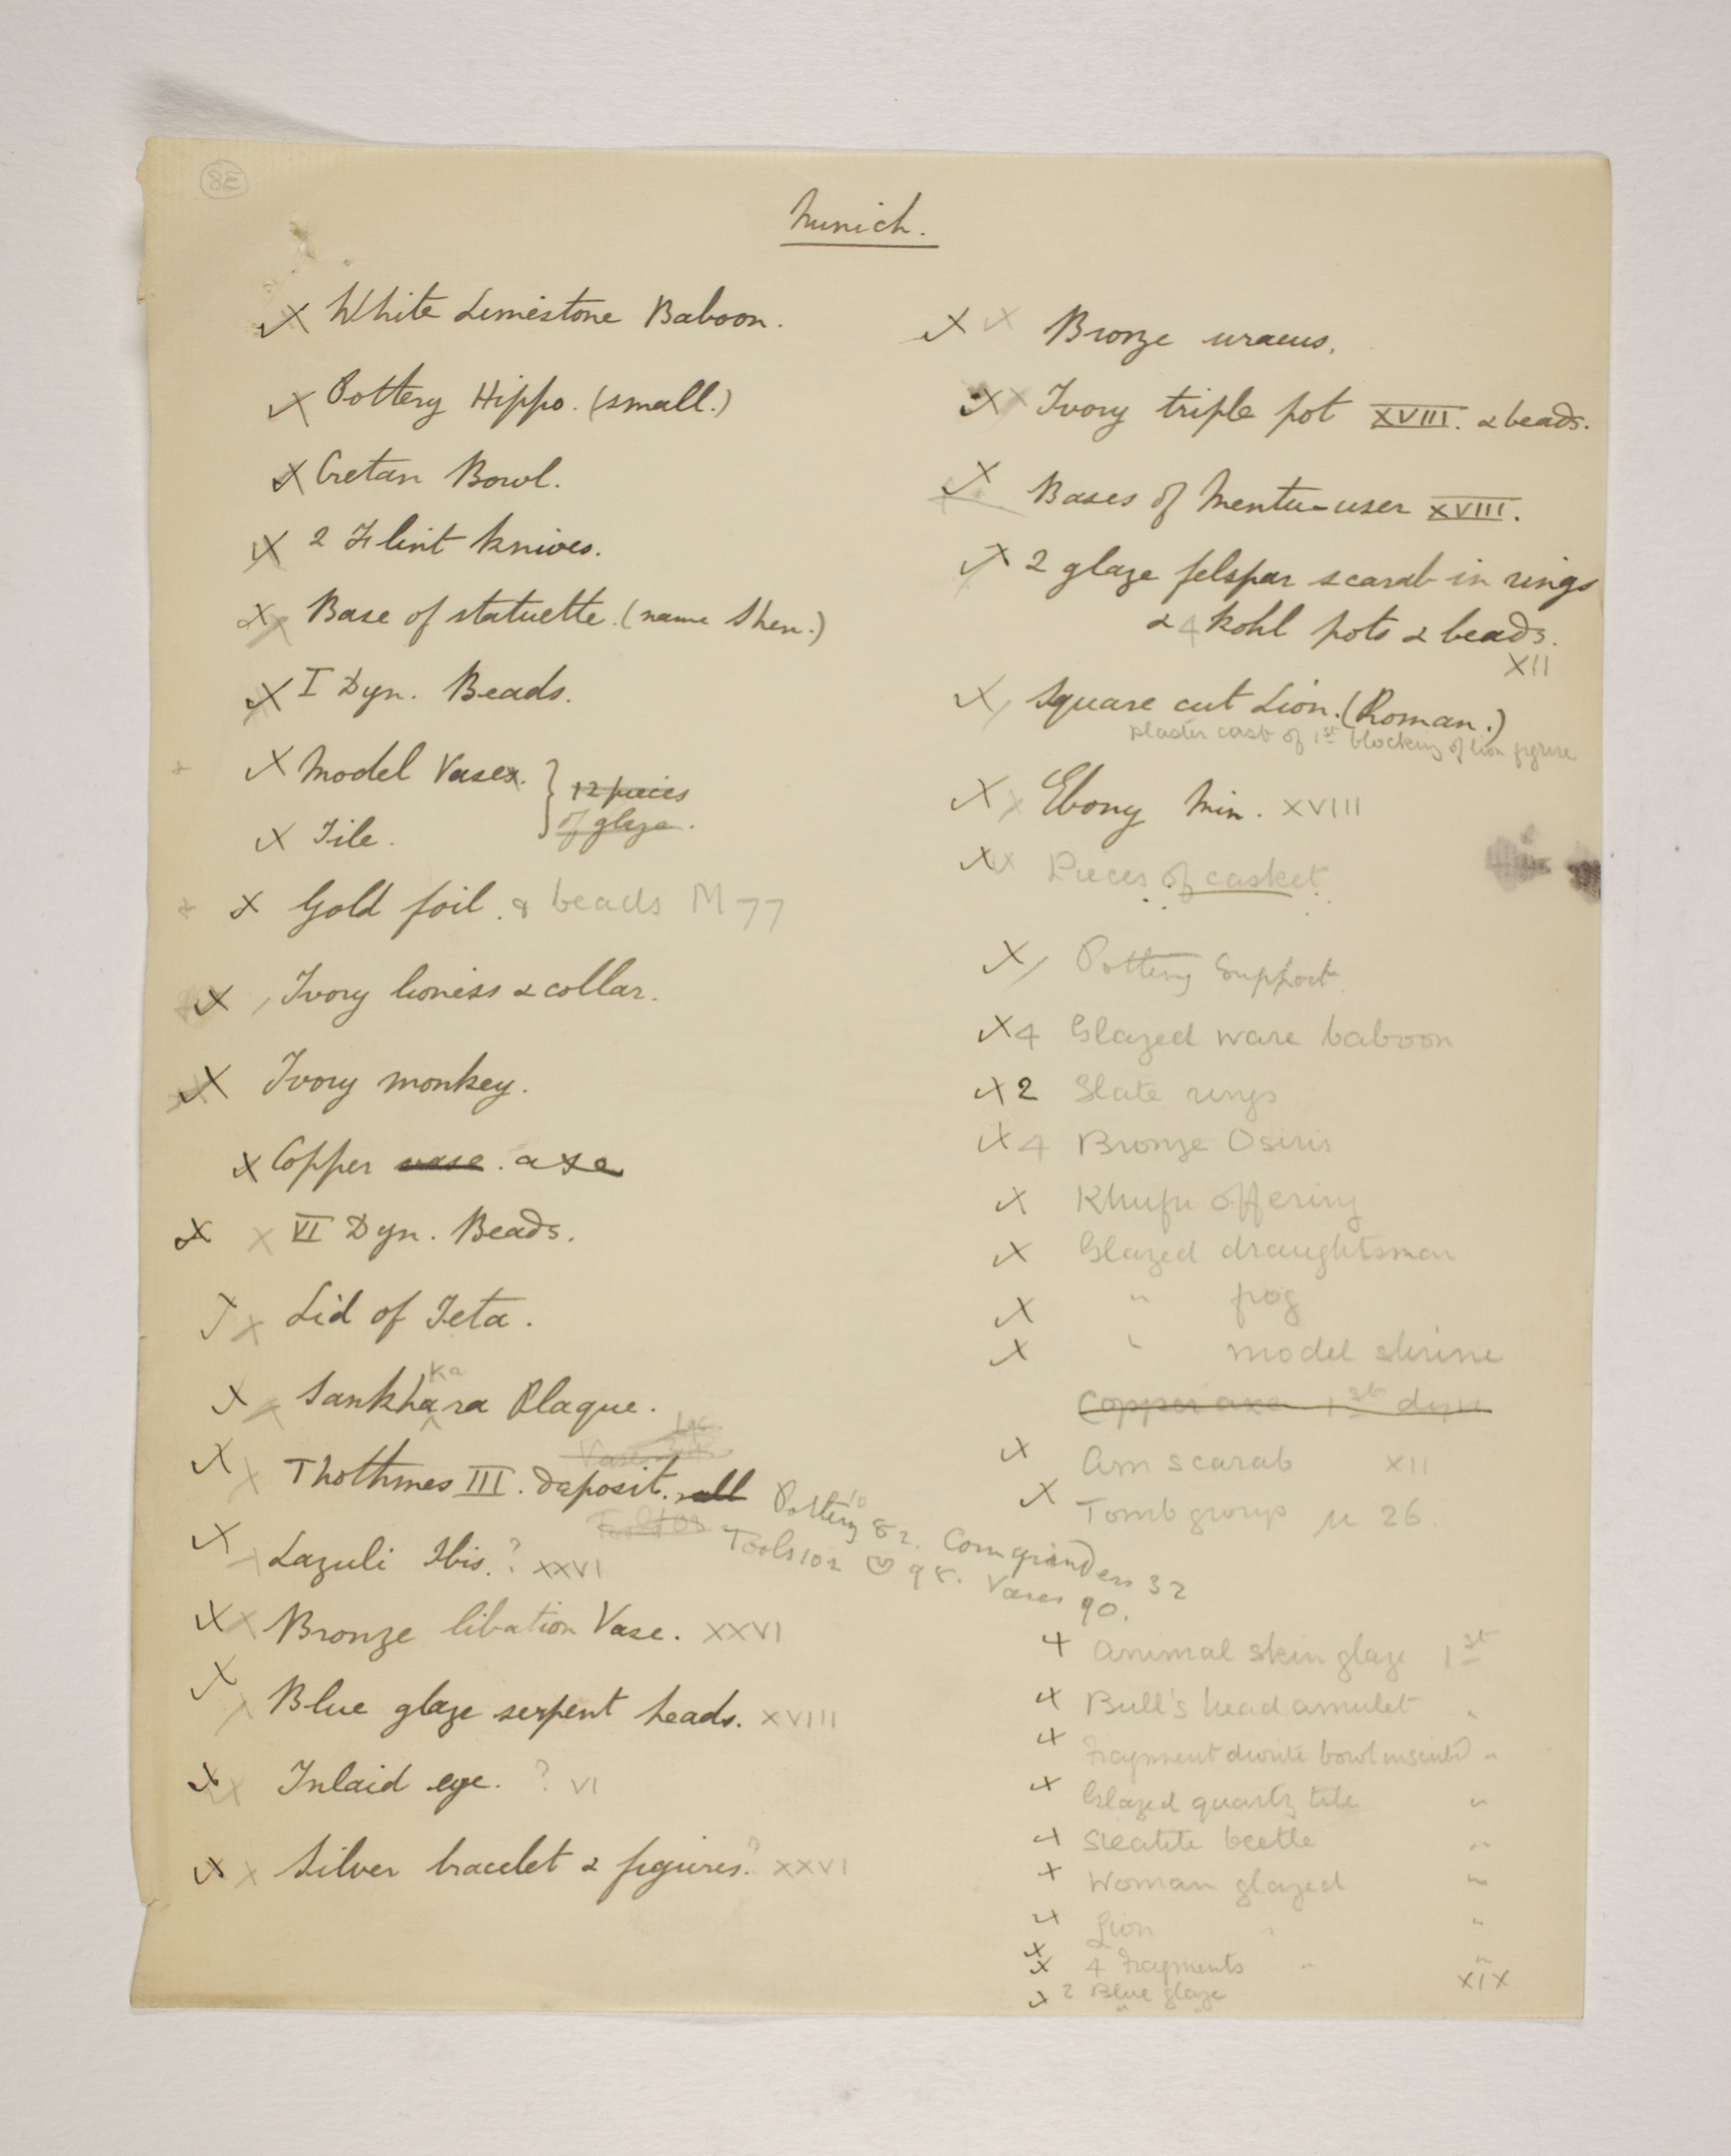 1902-03 Abydos Individual institution list  PMA/WFP1/D/11/38